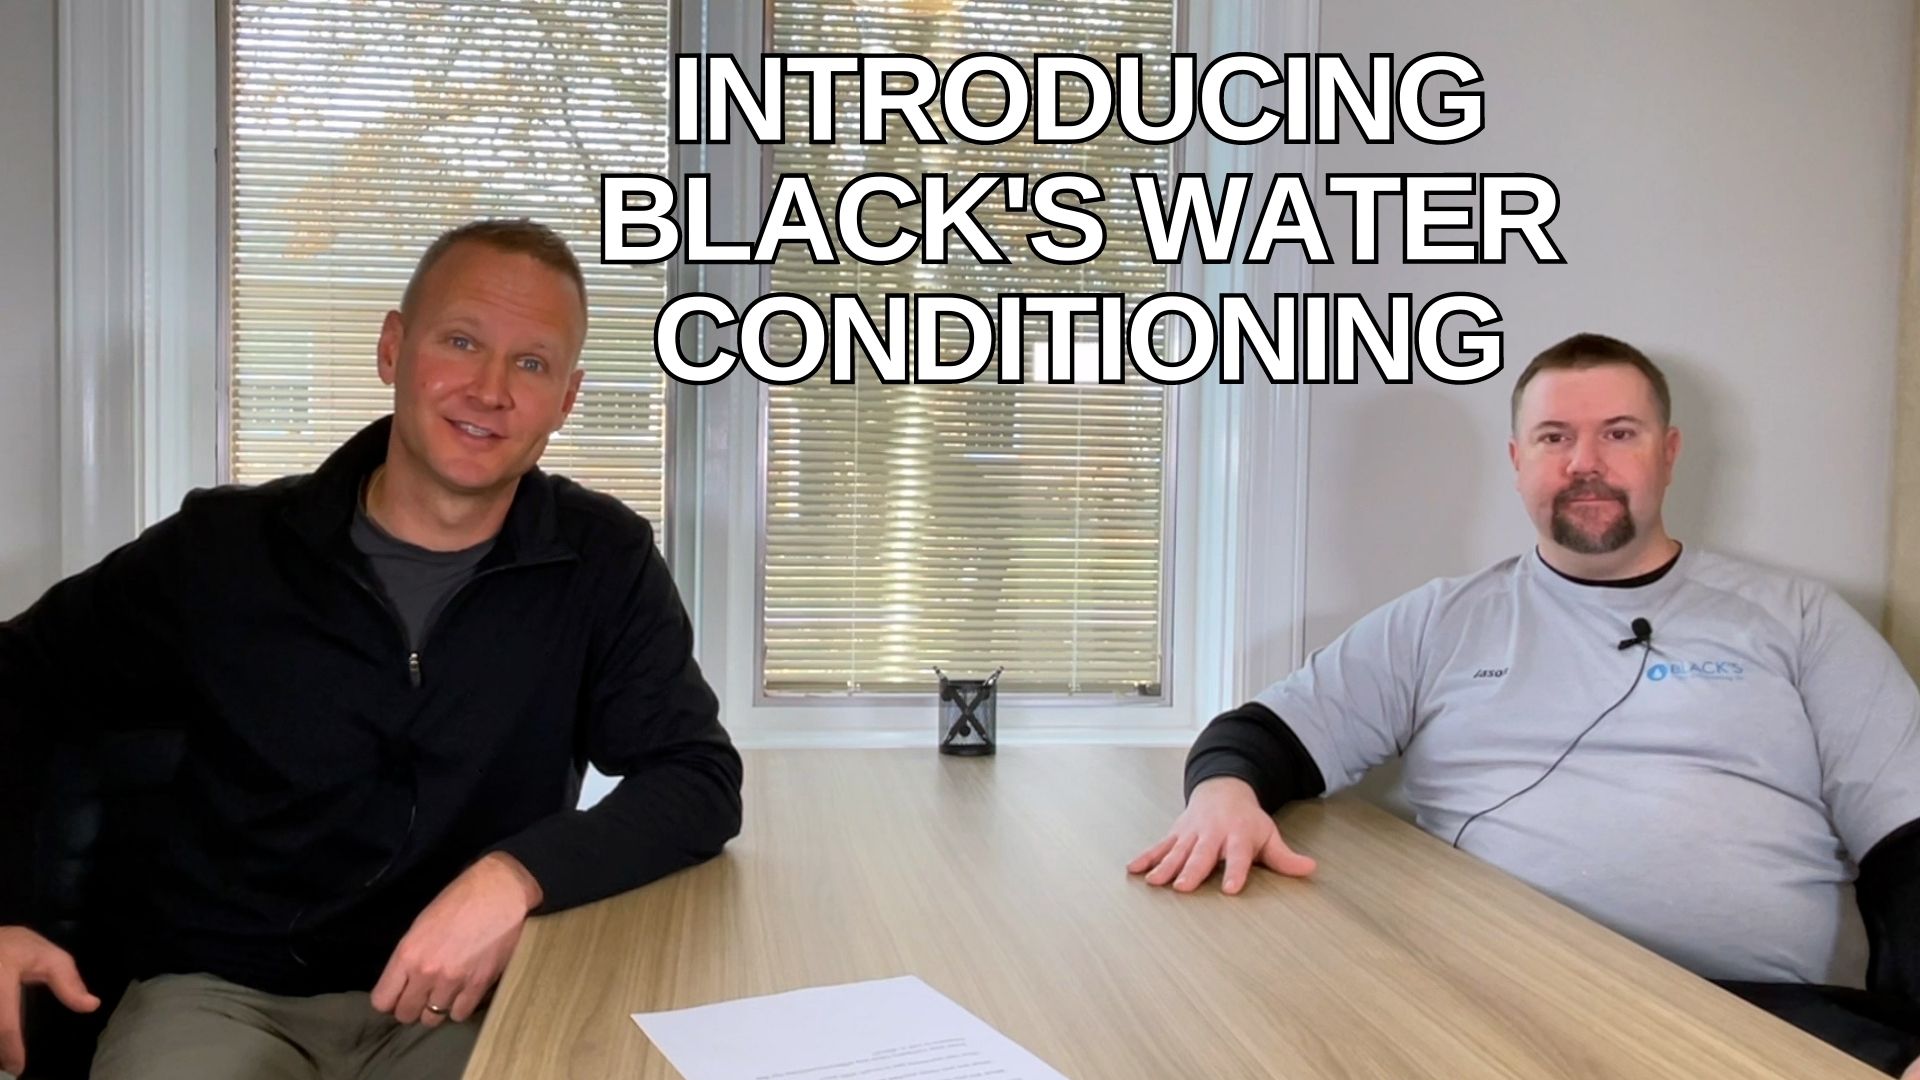 Make water better with Black’s Water Conditioning